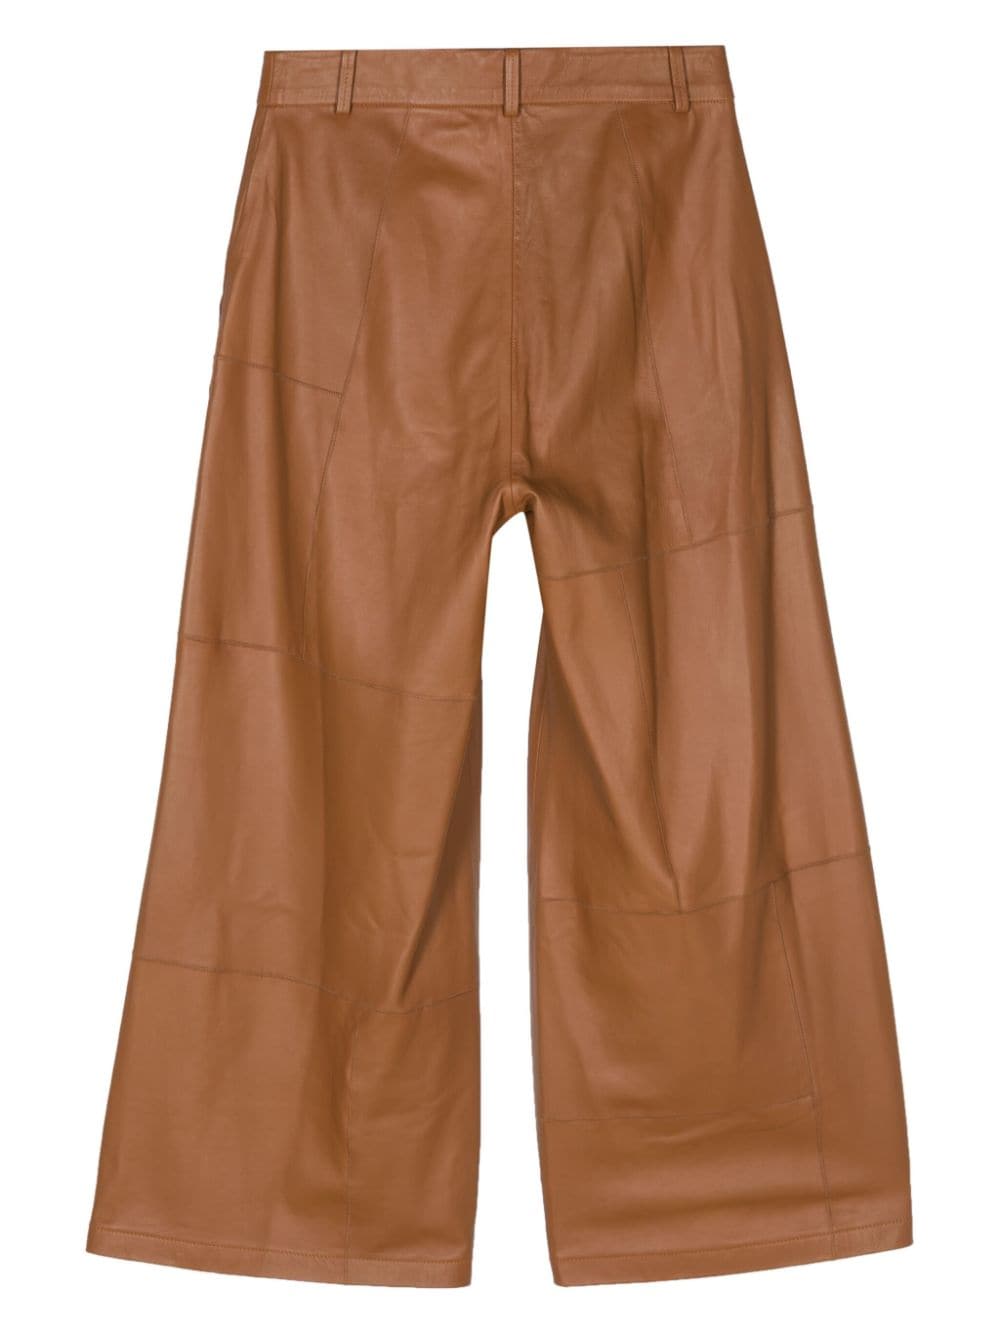 Alysi ALYSI- Wide Leg Cropped Leather Trousers